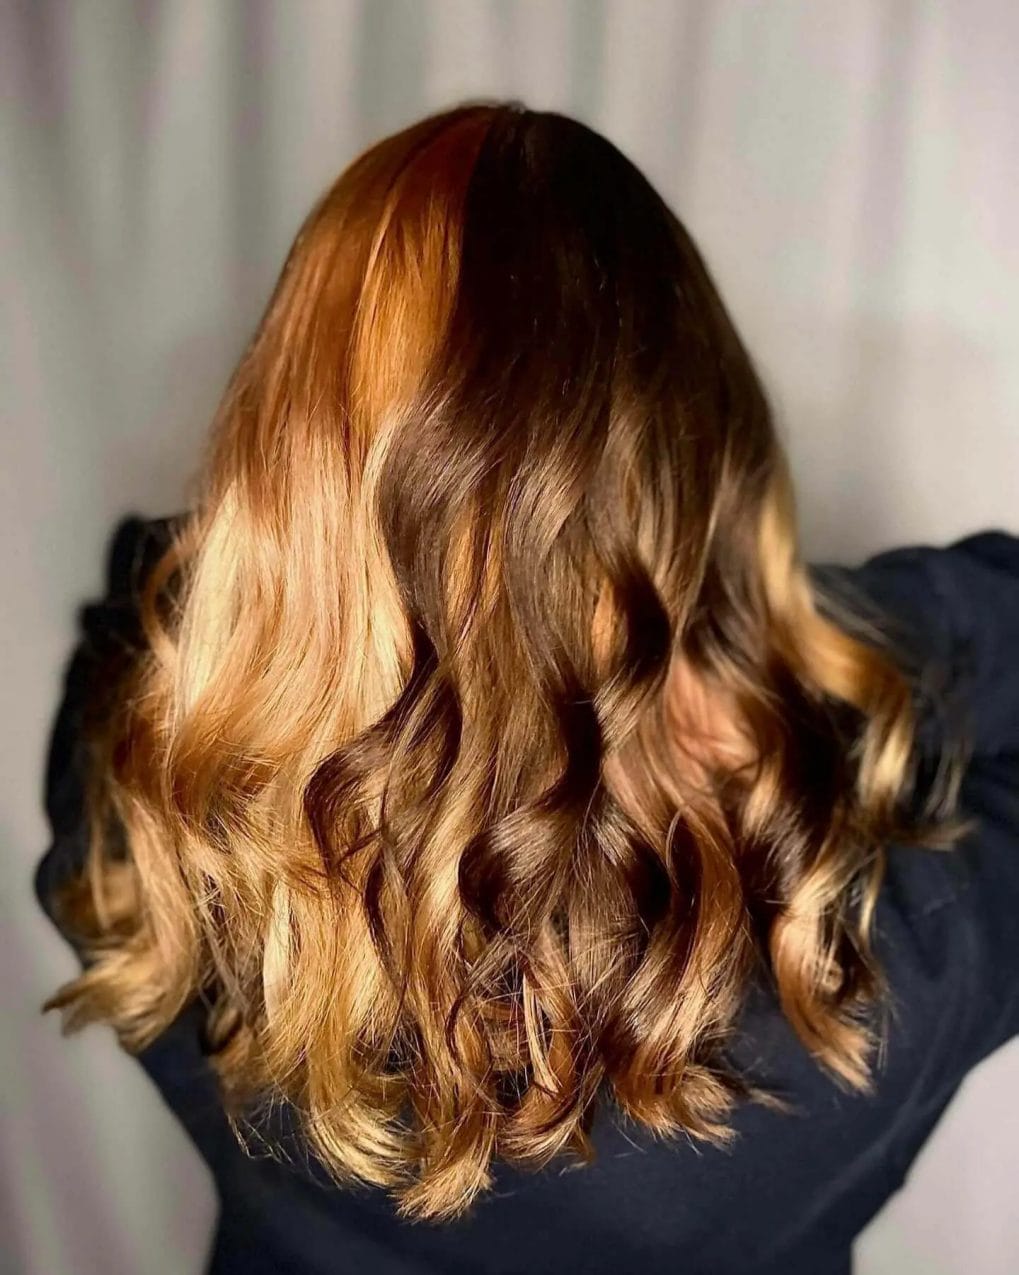 Warm caramel fades into dark chocolate roots in curly style